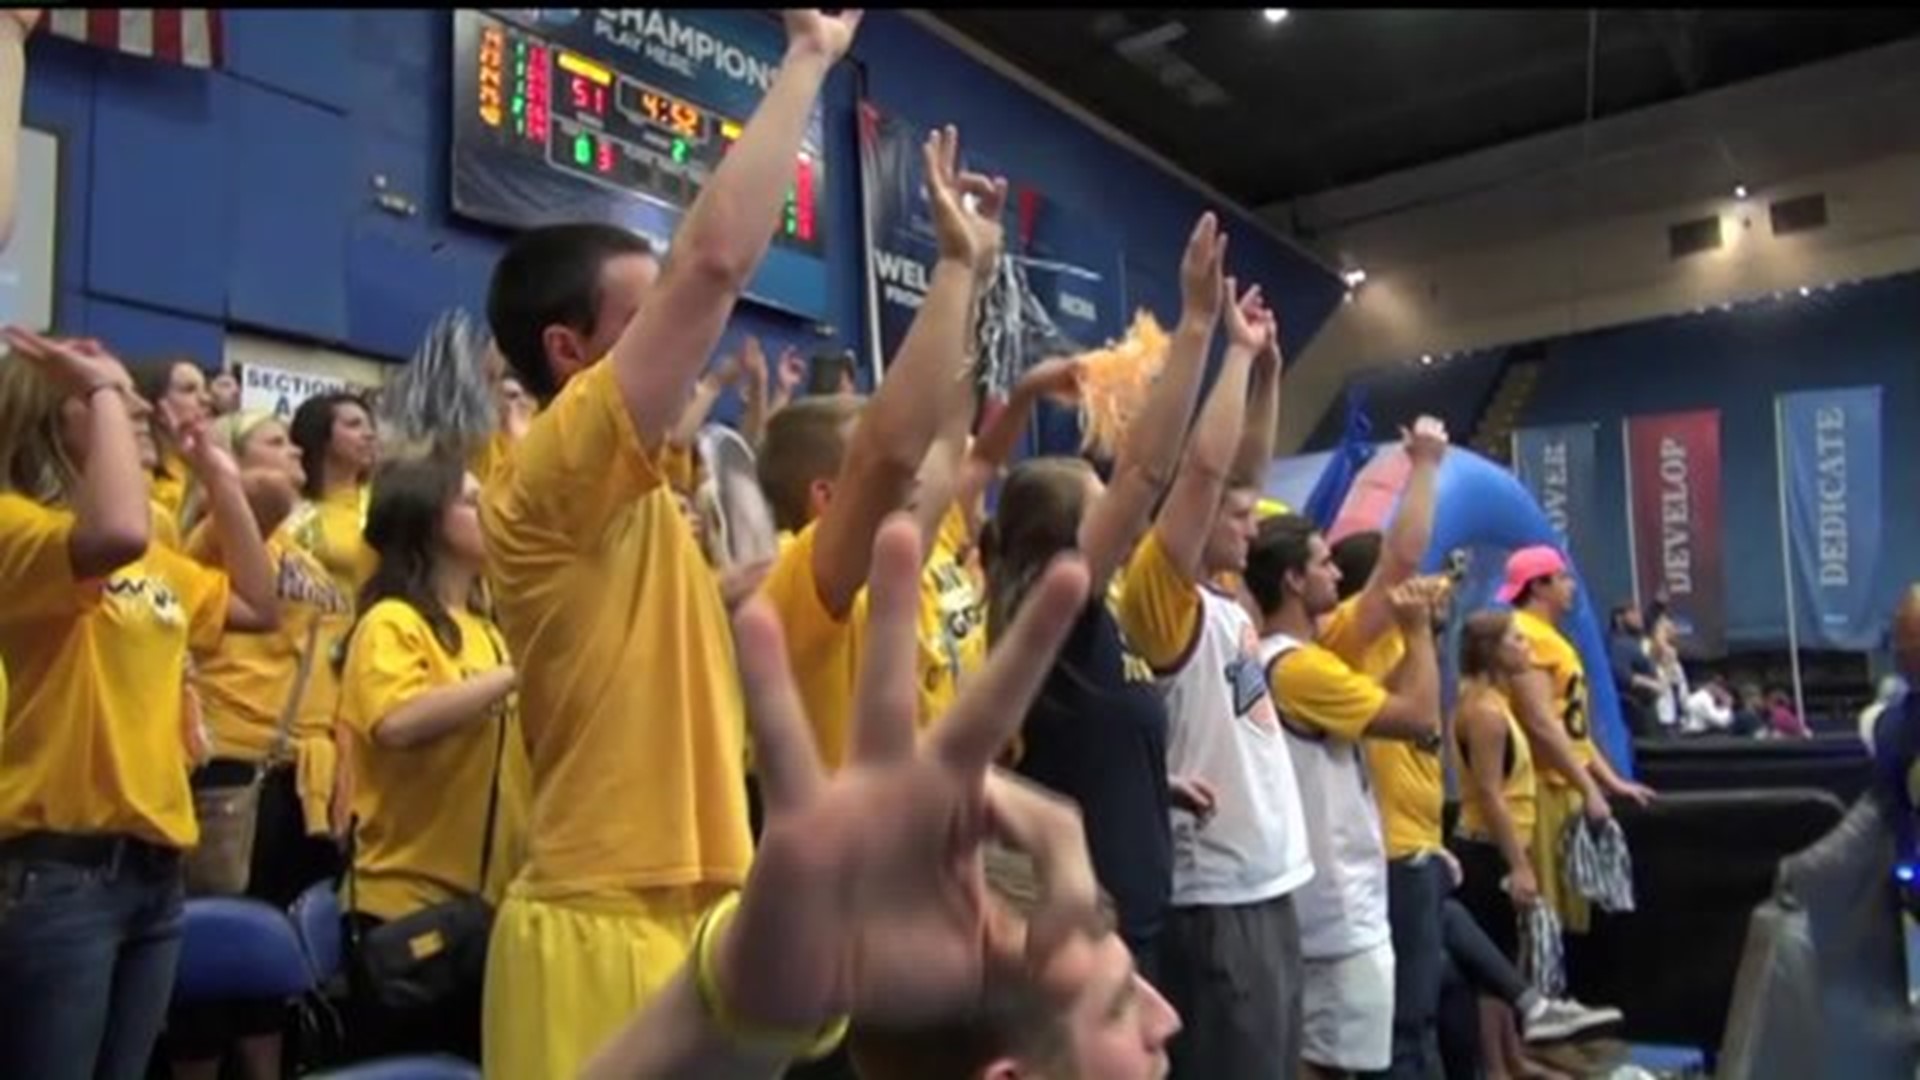 Vikings fans invade Salem to root for Augie in Final Four